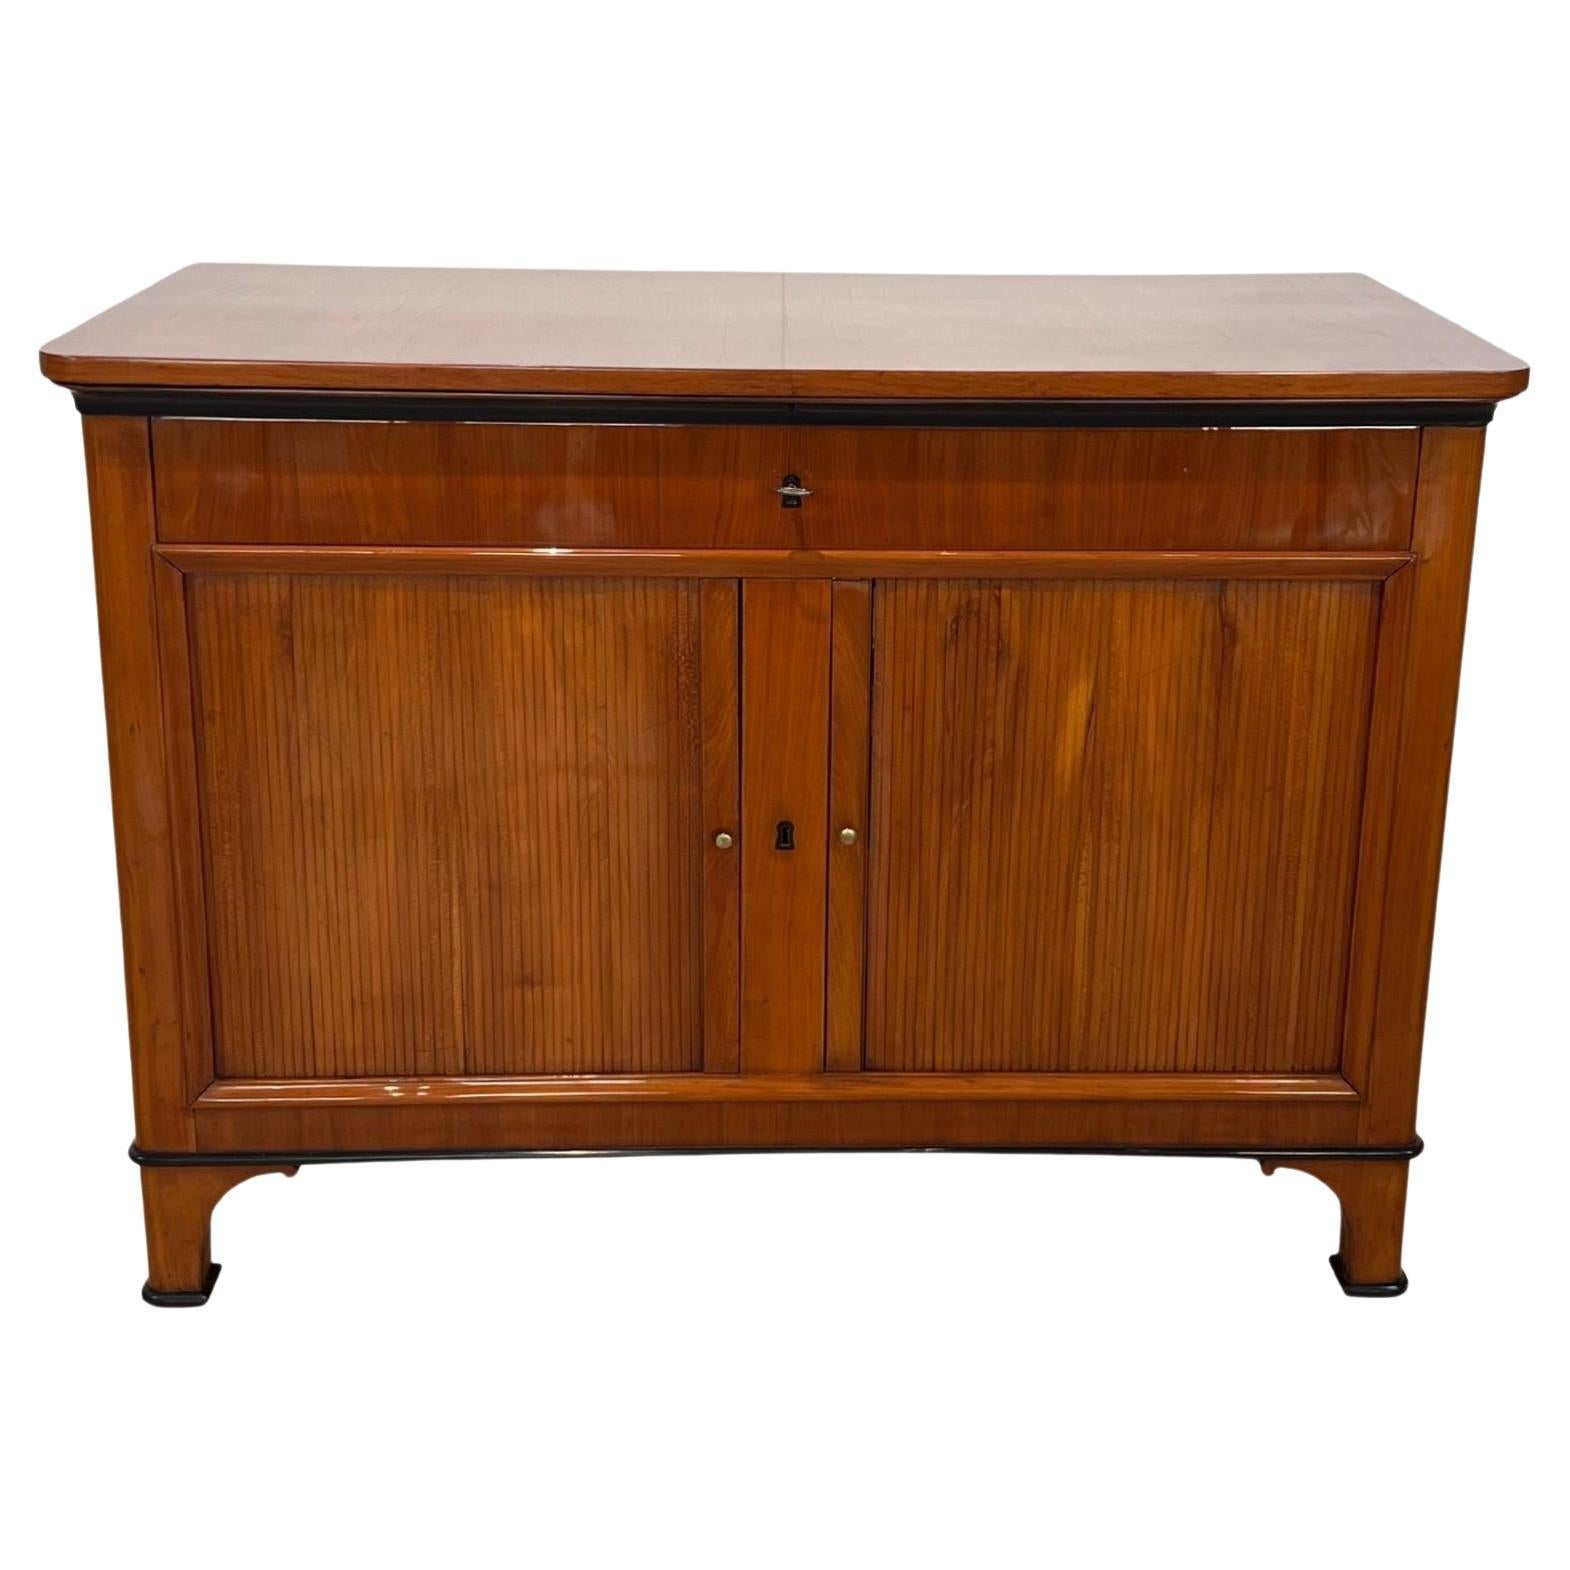 Biedermeier fold-up chest, cherry veneer, roller doors, Germany circa 1830.
 
Fancy half cupboard, chest or washing chest. Provenance: Middle Germany, probably Thuringia around 1830. Cherry veneered on soft wood and solid cherry. Foldable top with